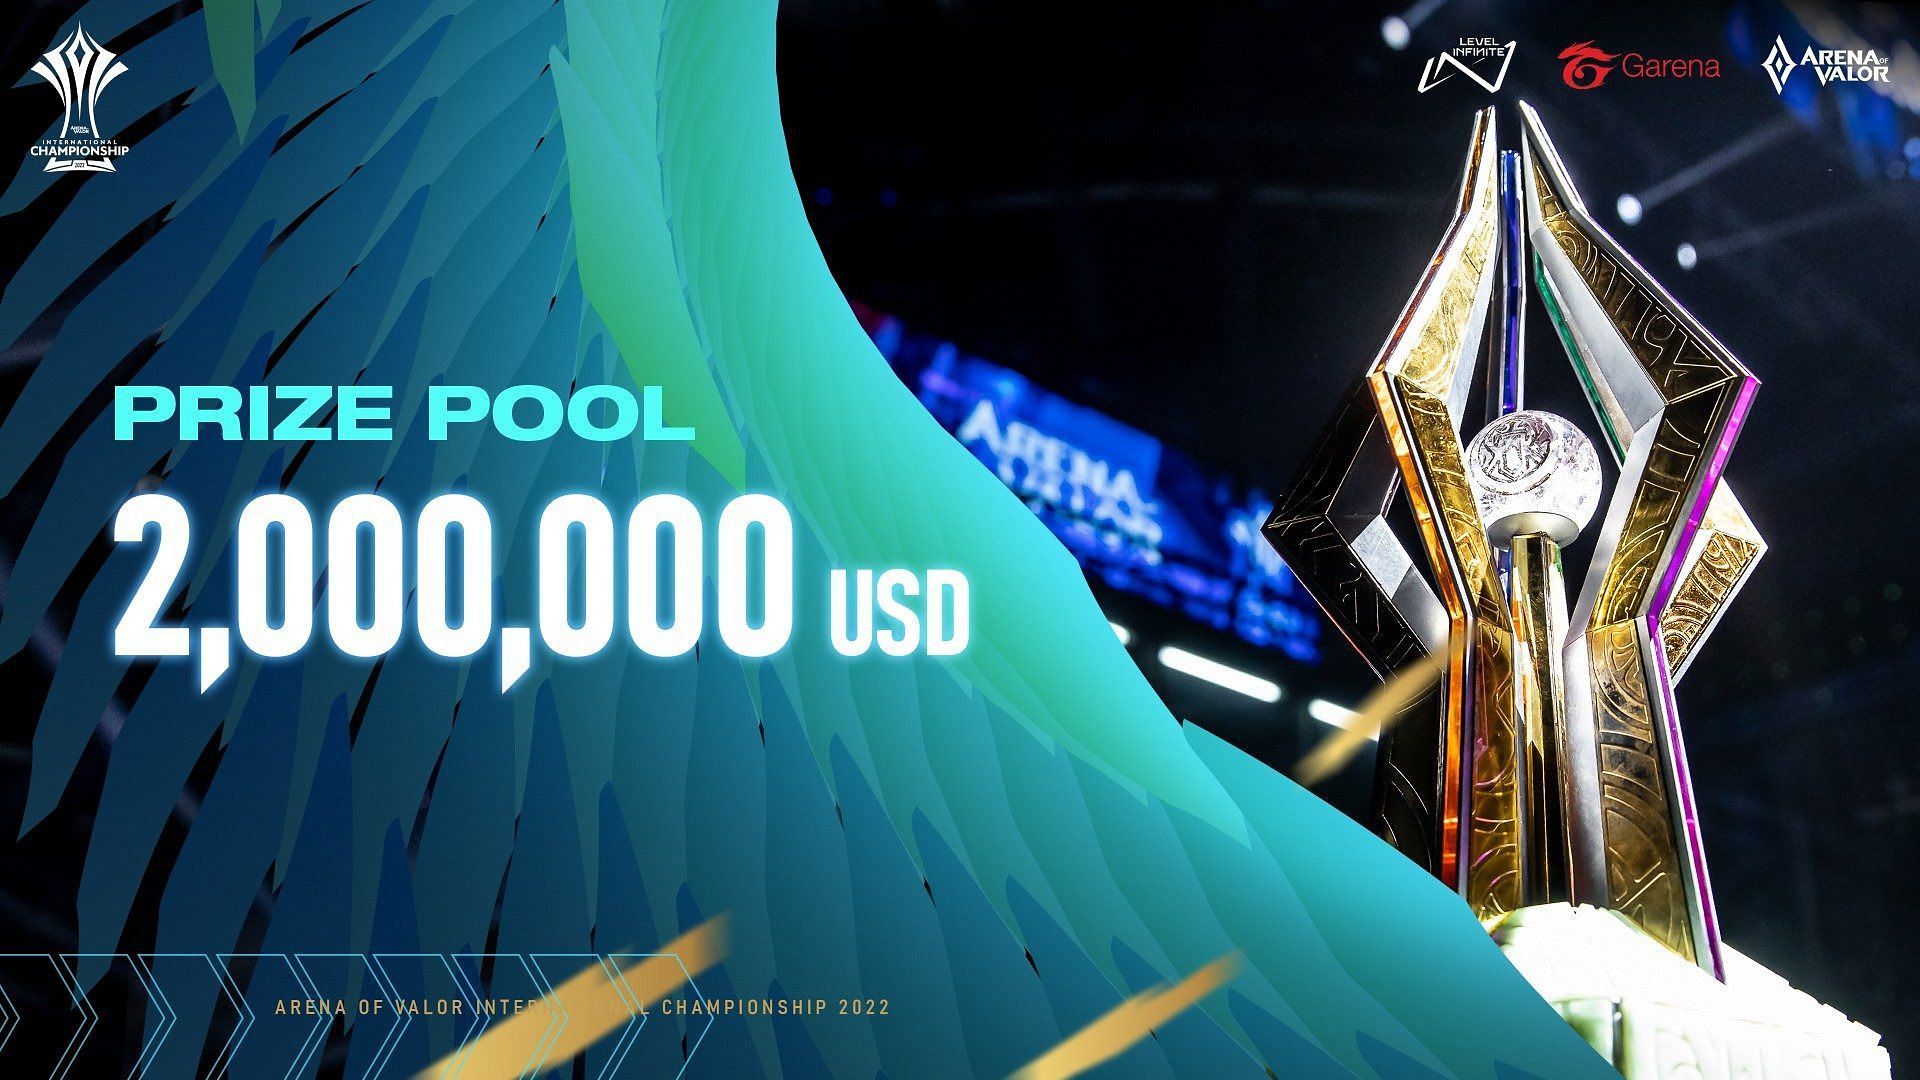 The Arena of Valor International Championship 2022 features a massive prize pool of $2 million (Image via Garena)